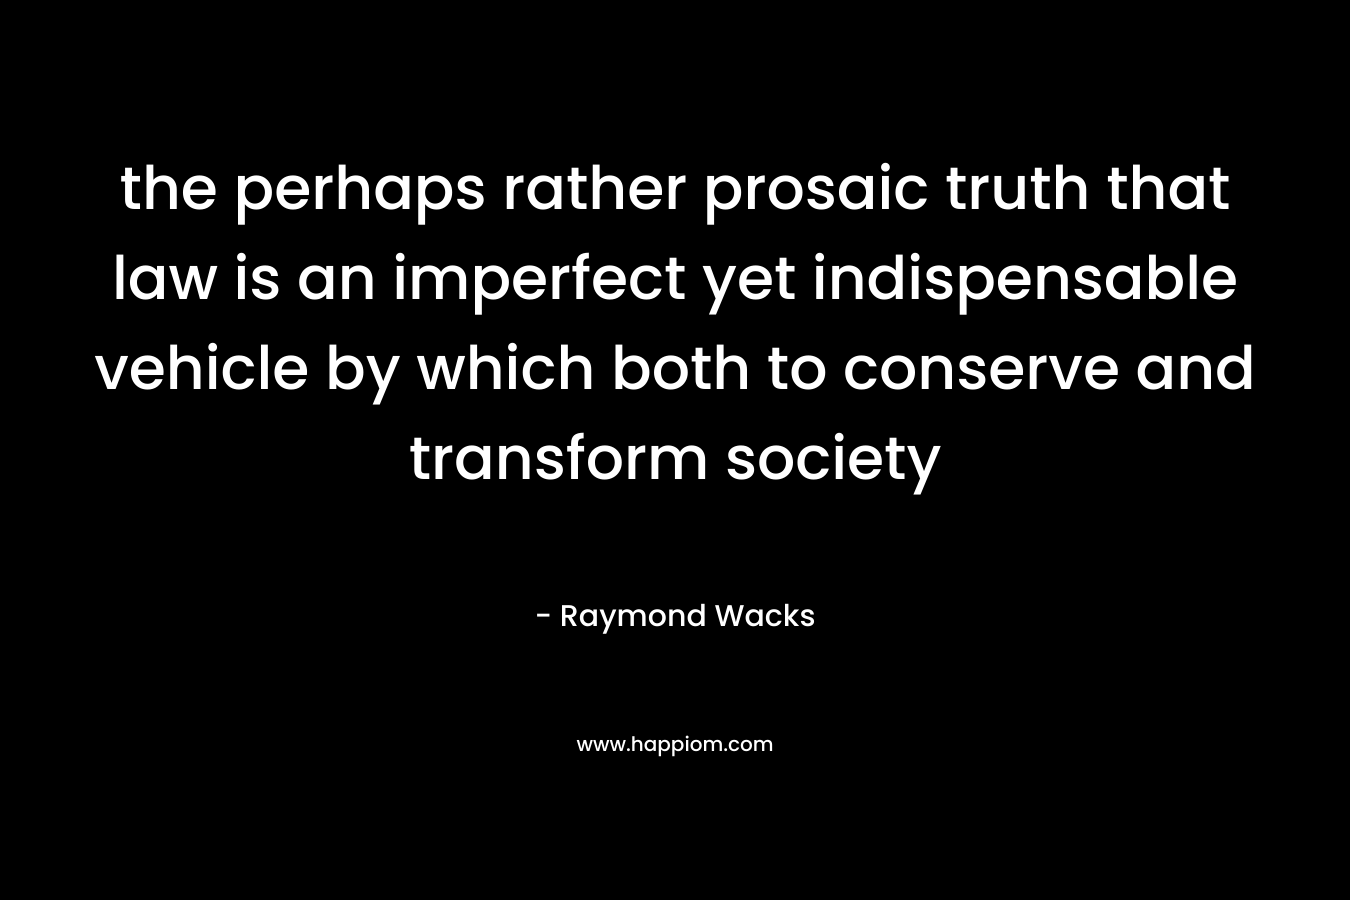 the perhaps rather prosaic truth that law is an imperfect yet indispensable vehicle by which both to conserve and transform society – Raymond Wacks